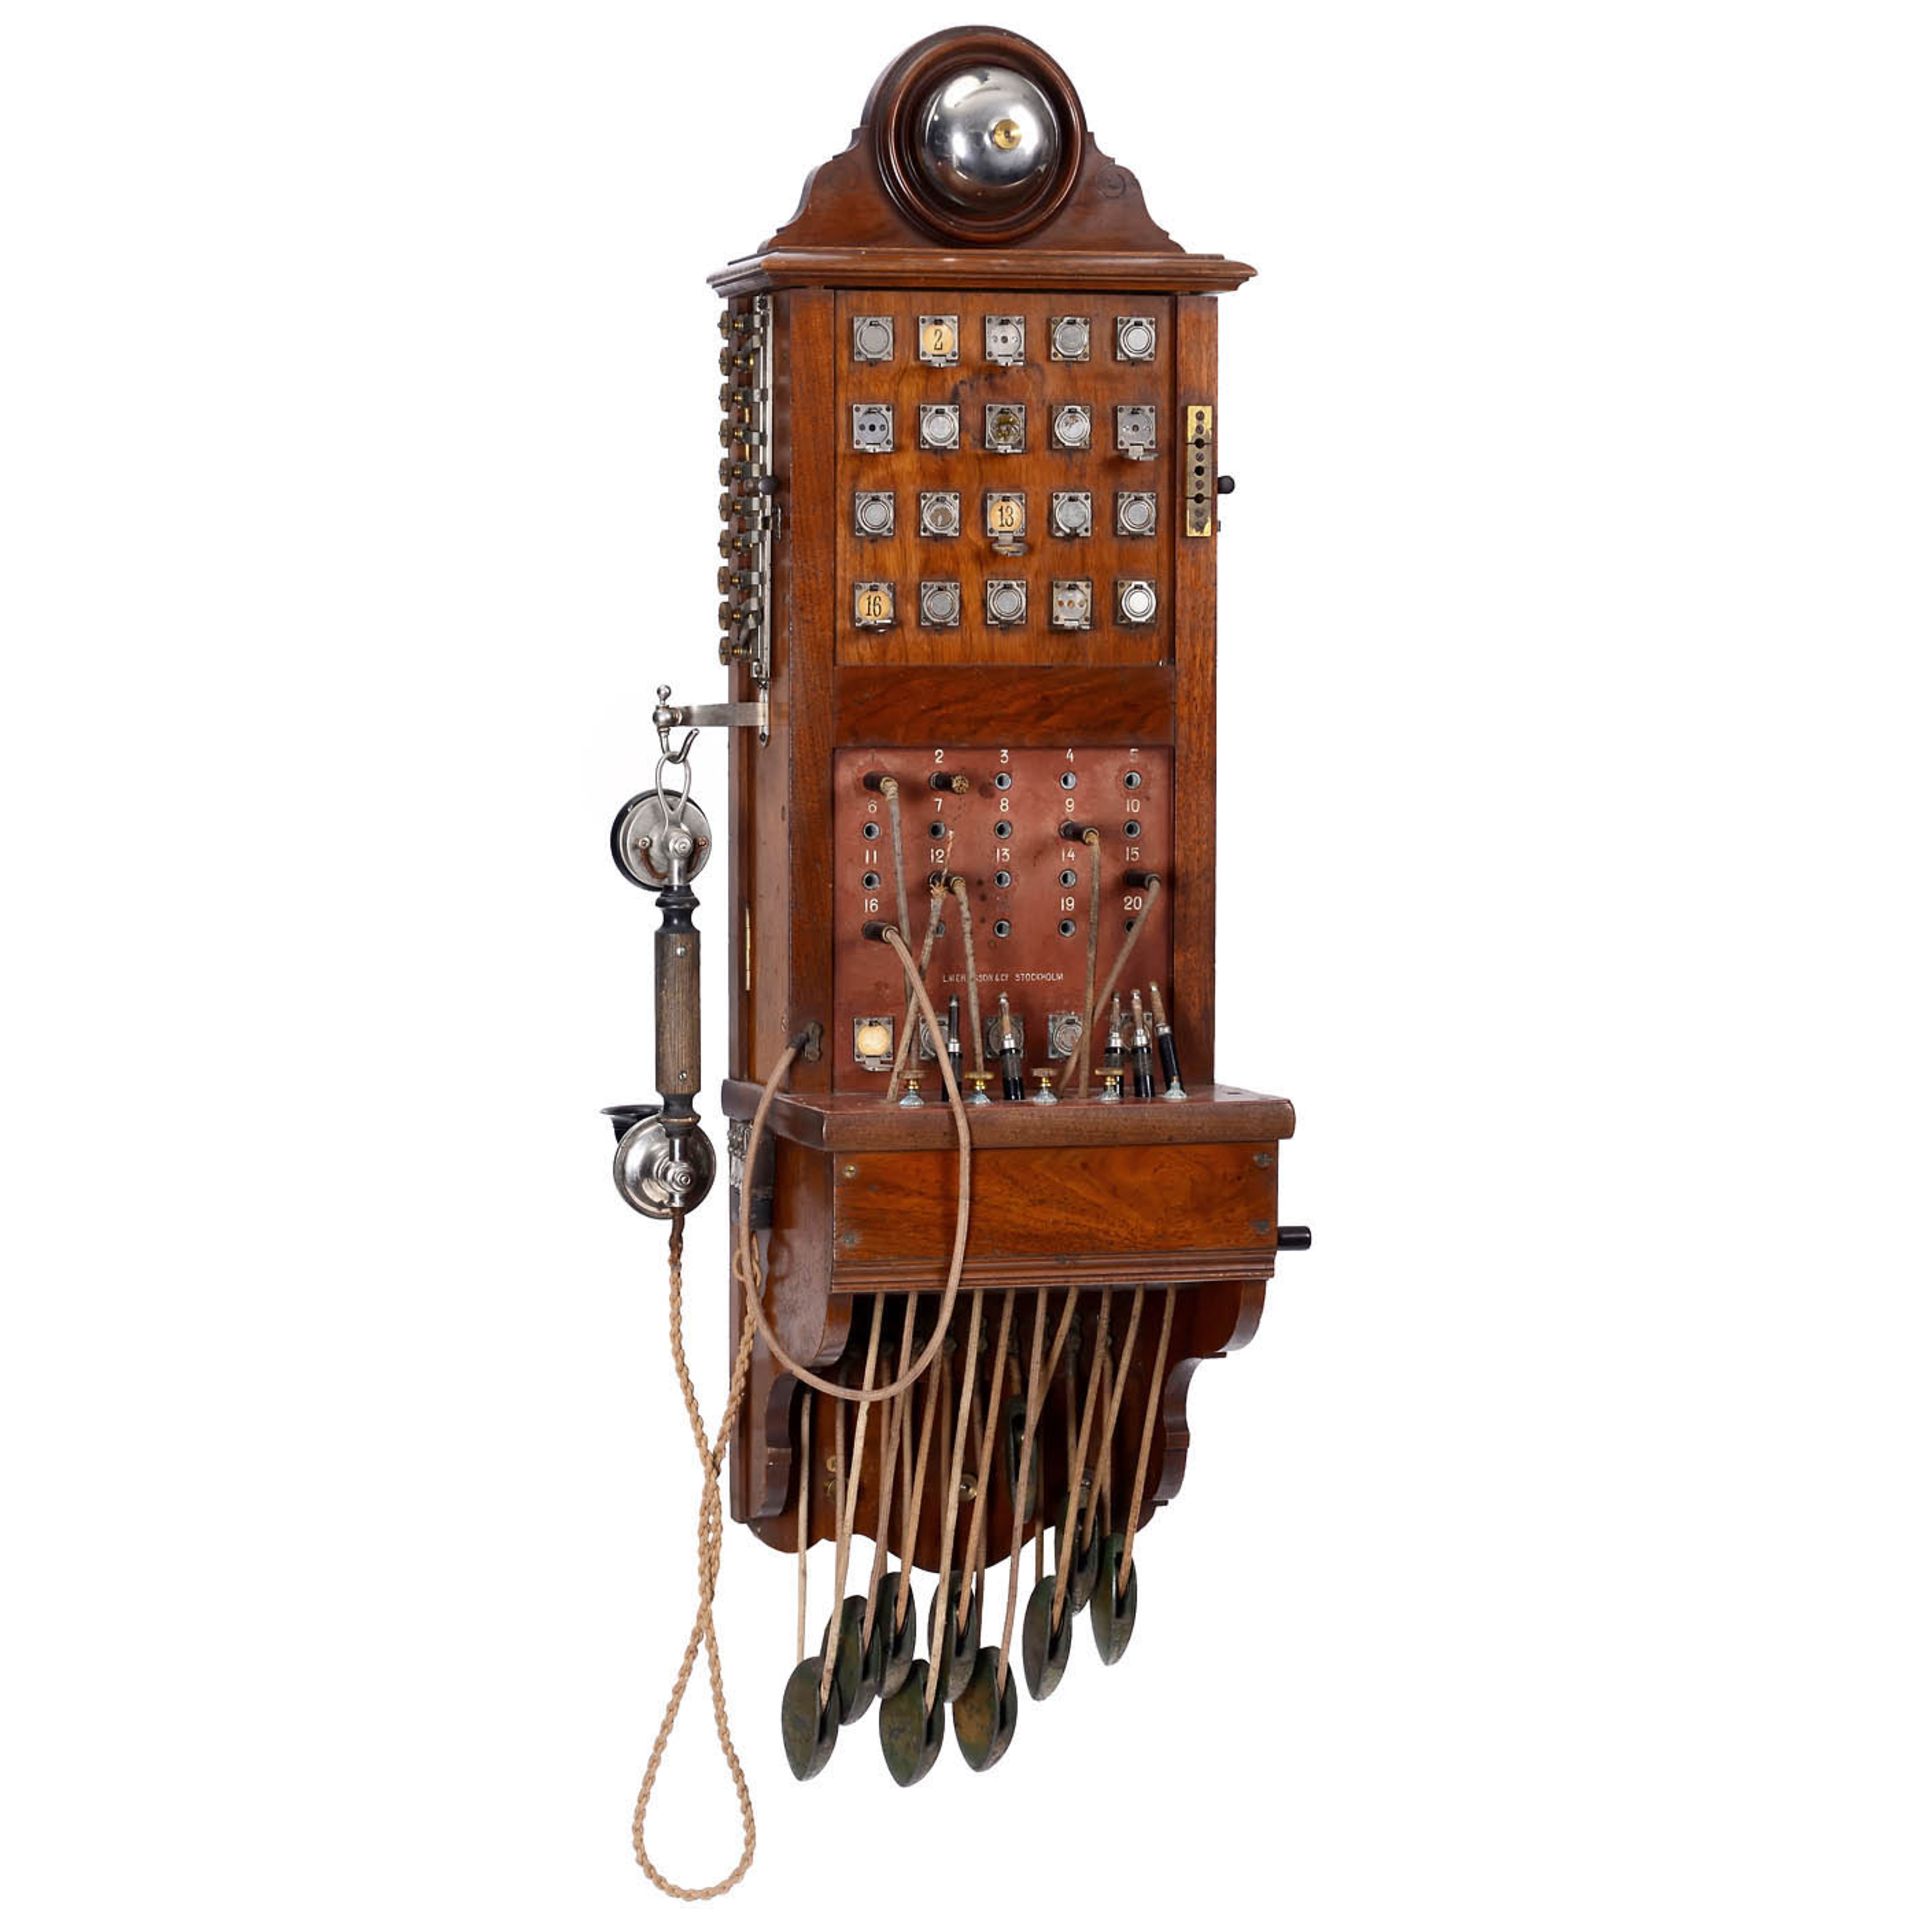 Large Switchboard by L.M. Ericsson, c. 1890 - Image 2 of 3